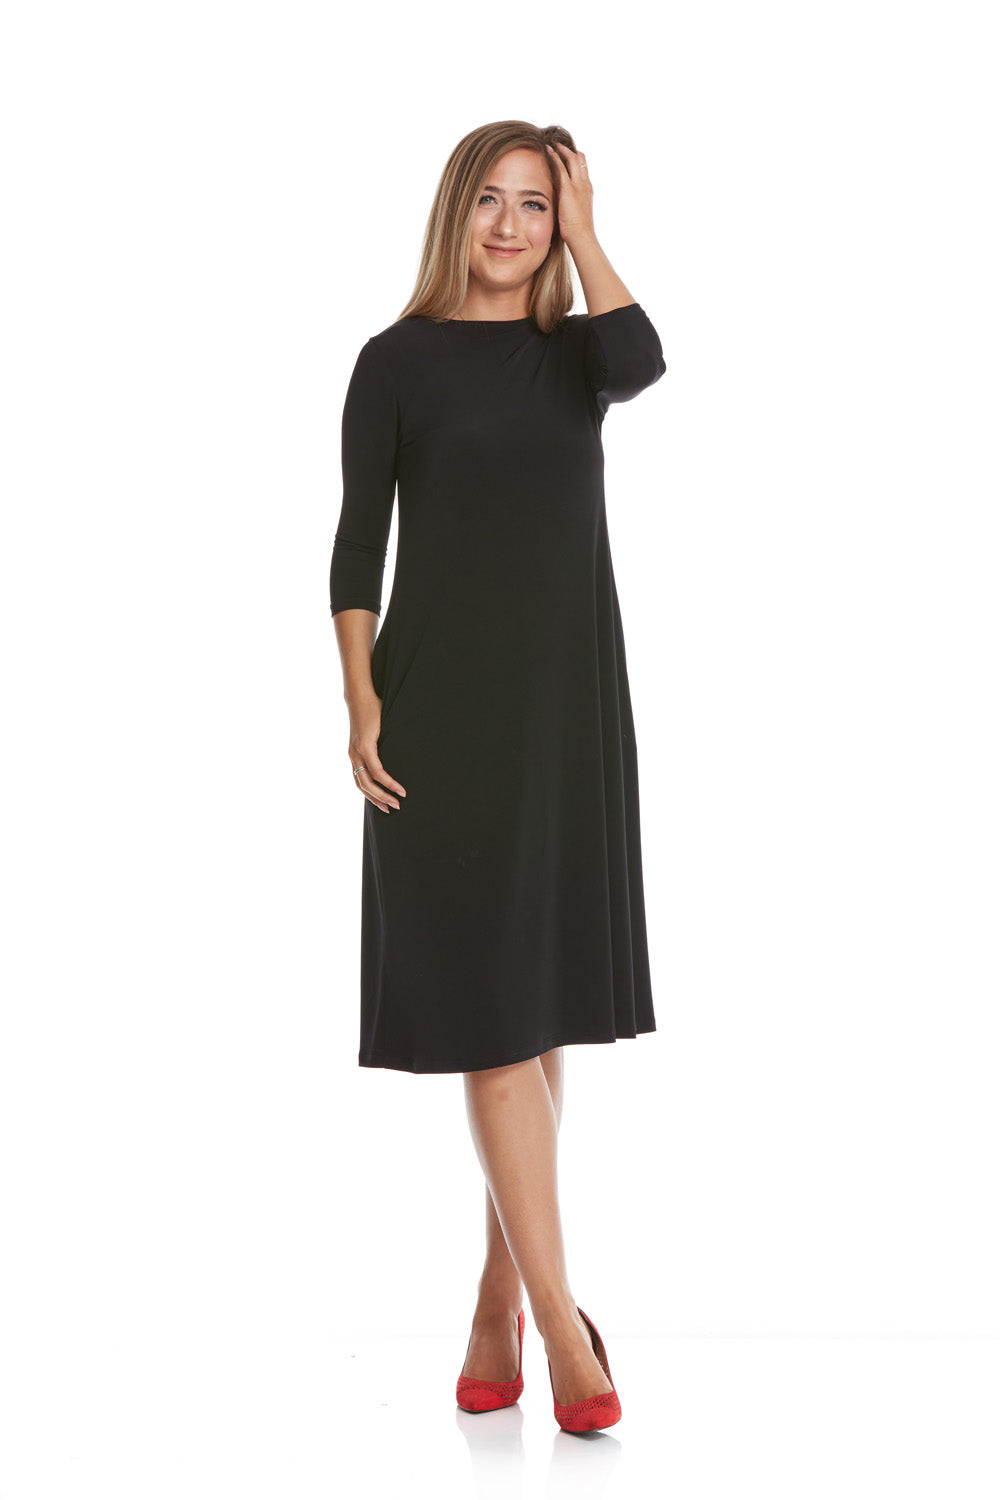 Black flary below knee length 3/4 sleeve crew neck modest tznius a-line dress with pockets big enough for smartphone